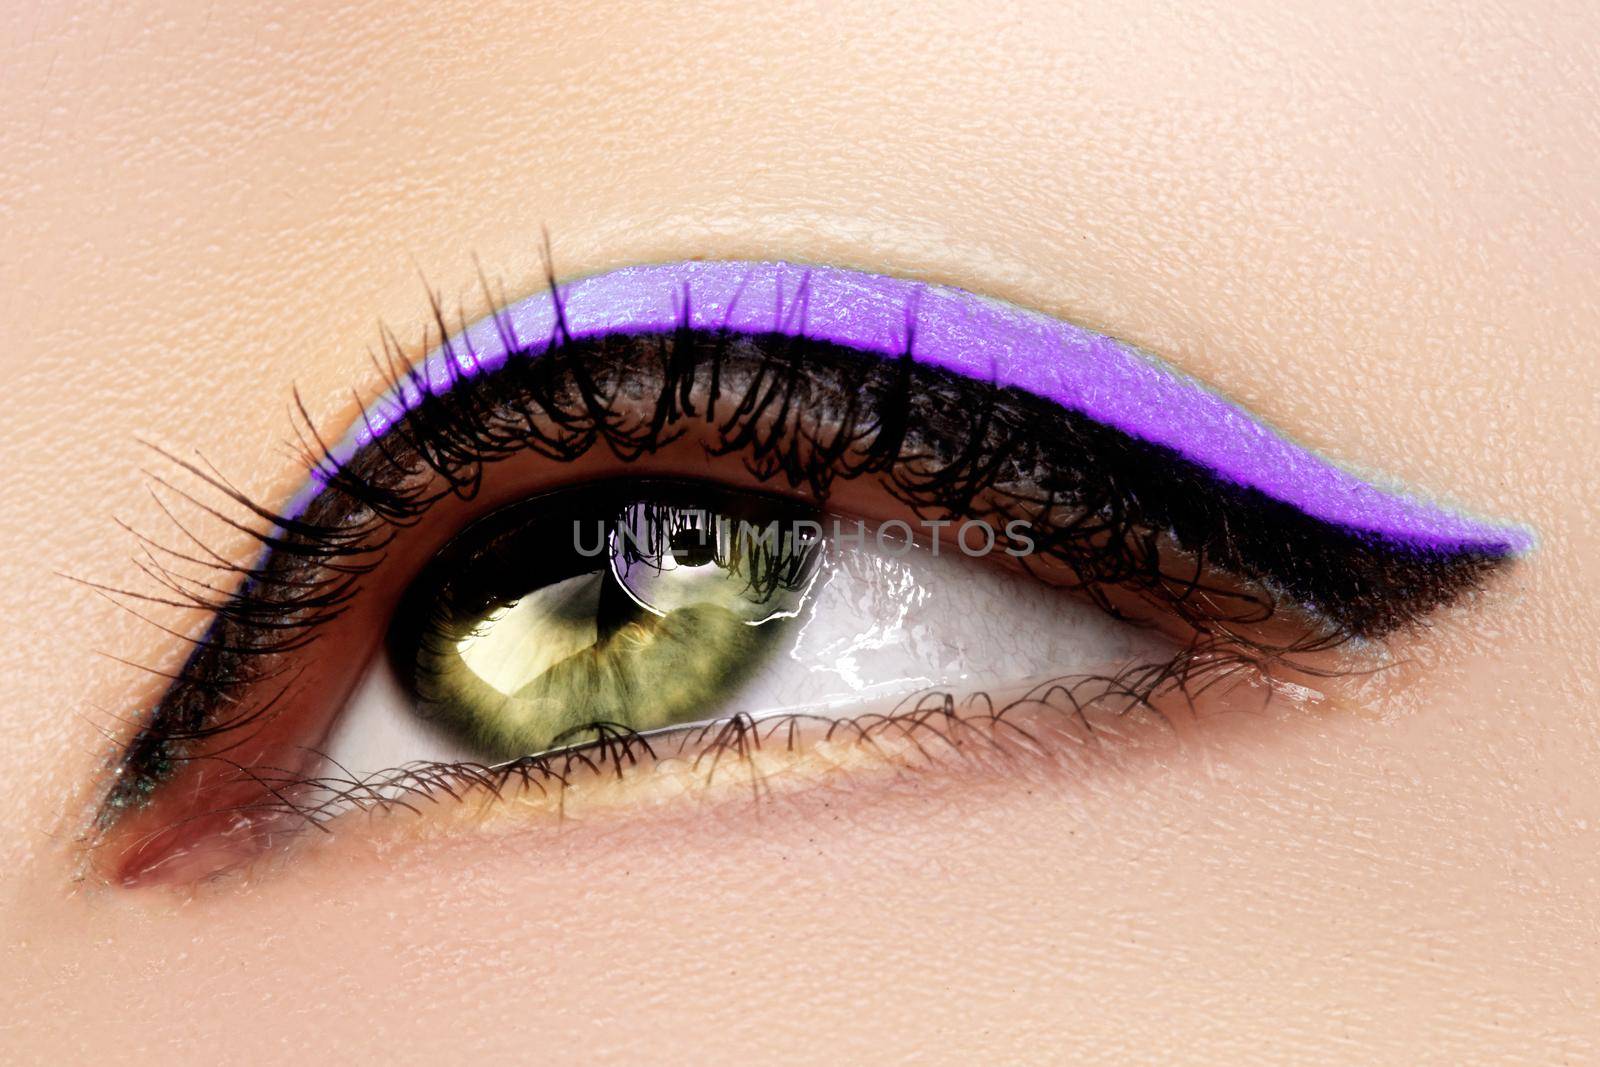 Beautiful Macro Shot of Female Green Eye with Makeup. Perfect Shape of Eyebrows, Purple Eyeliner. Cosmetics and Make-up. Close-up Beauty Photo